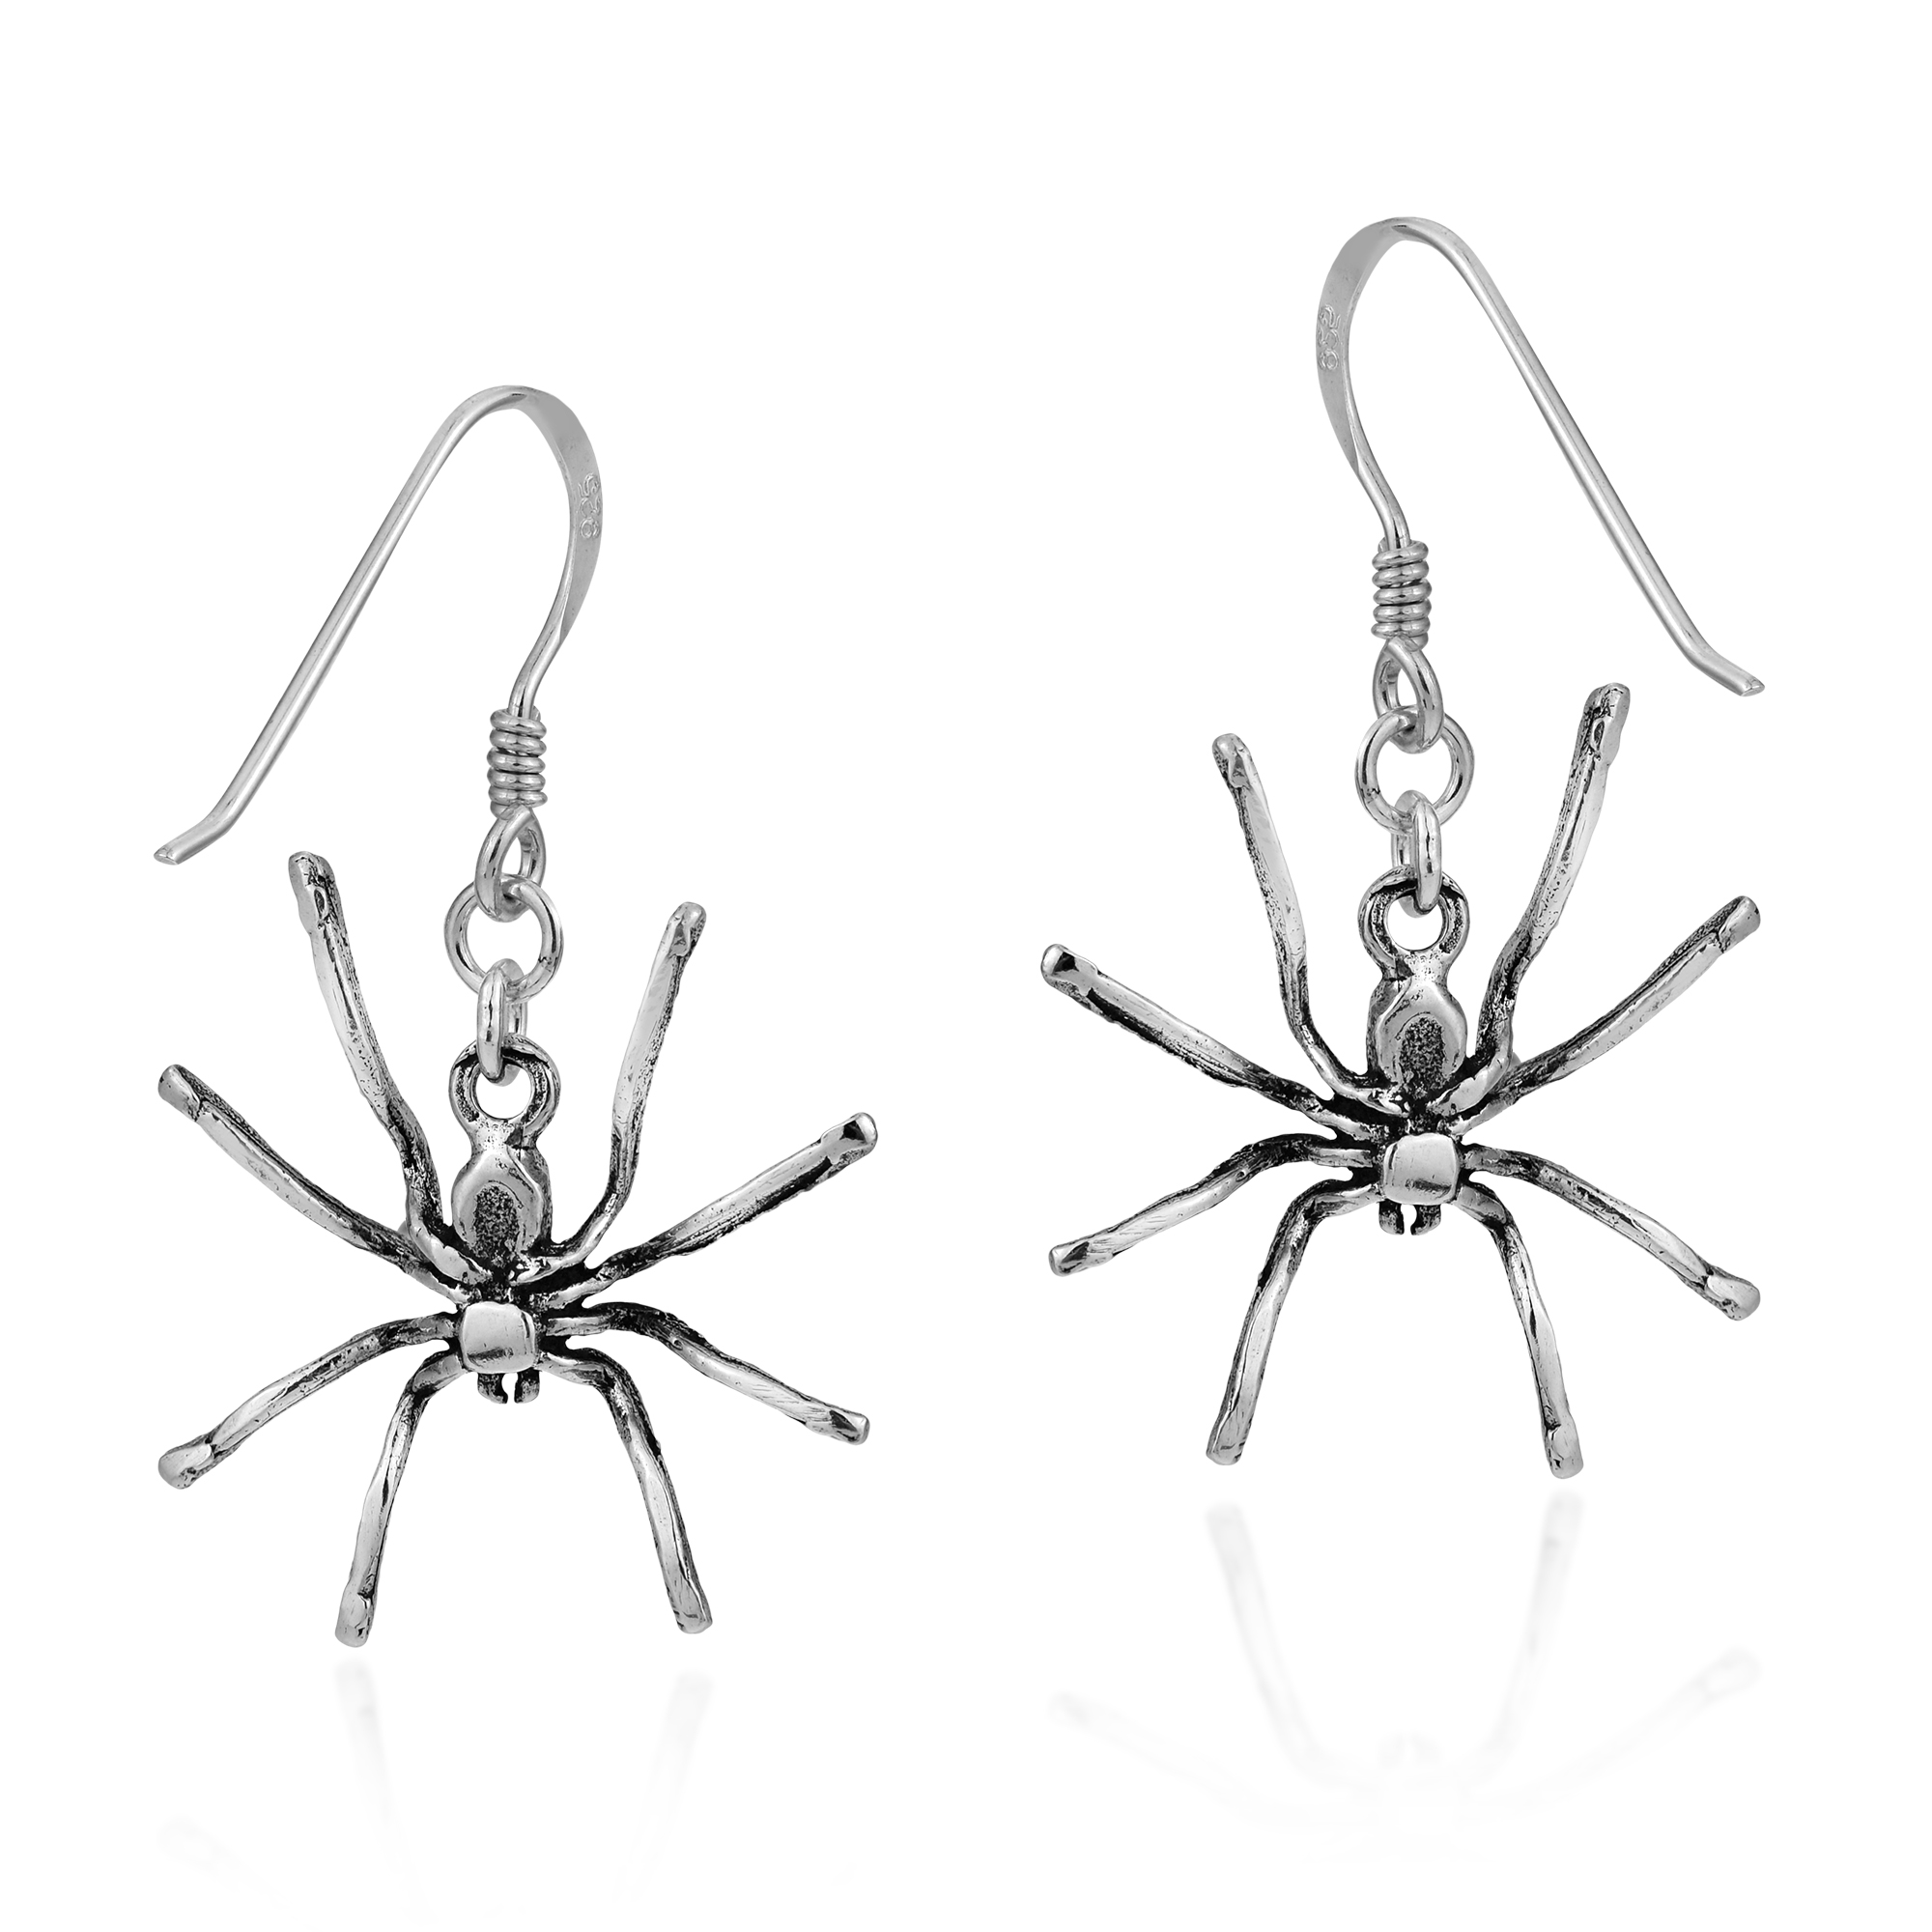 Edgy Hanging Spider Sterling Silver Dangle Earrings | eBay